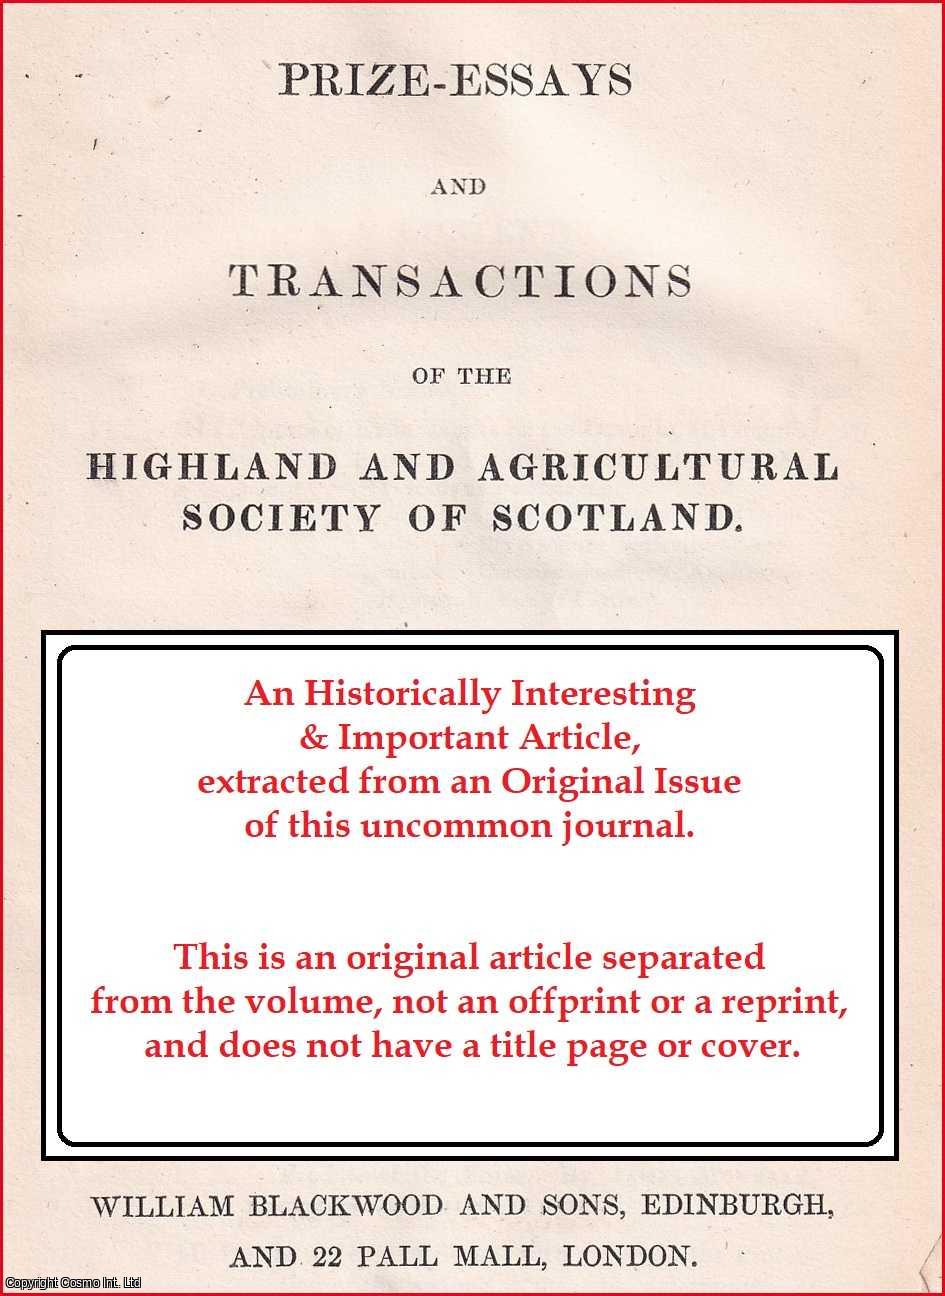 James Blaikie, Esq. Advocate in Aberdeen. - The Improvement of Pasture & Grass Lands by Top-Dressing, & otherwise. An uncommon original article from the Prize Essays and Transactions of the Highland Society of Scotland, 1829.